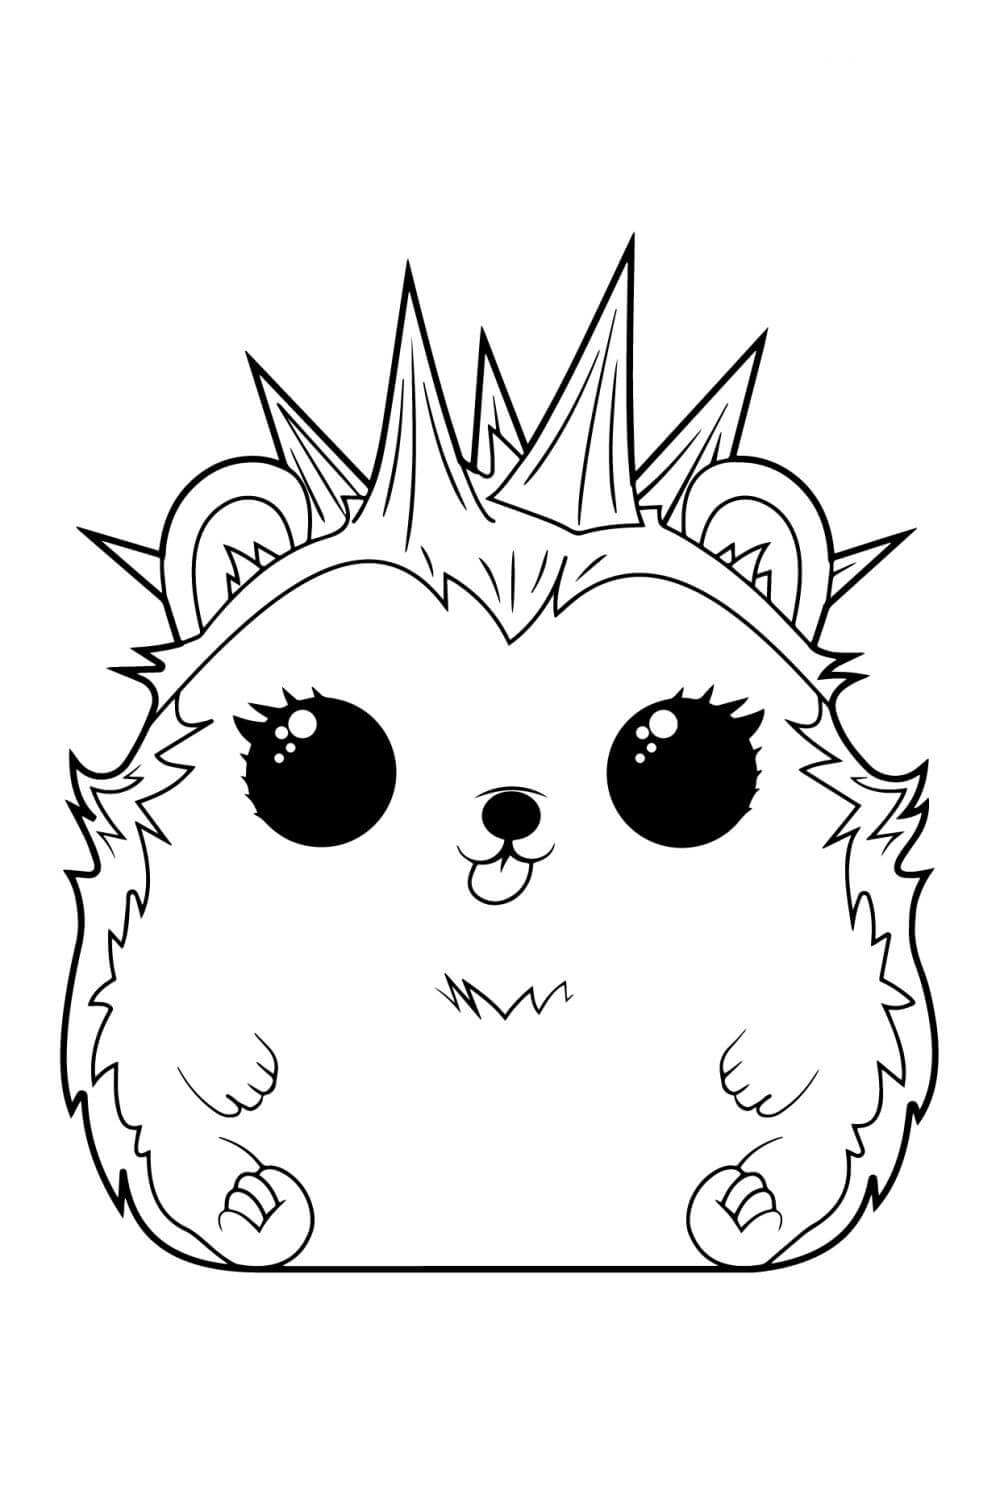 Printable LOL Pets Coloring Pages BB Pup  Puppy coloring pages, Unicorn  coloring pages, Lol dolls